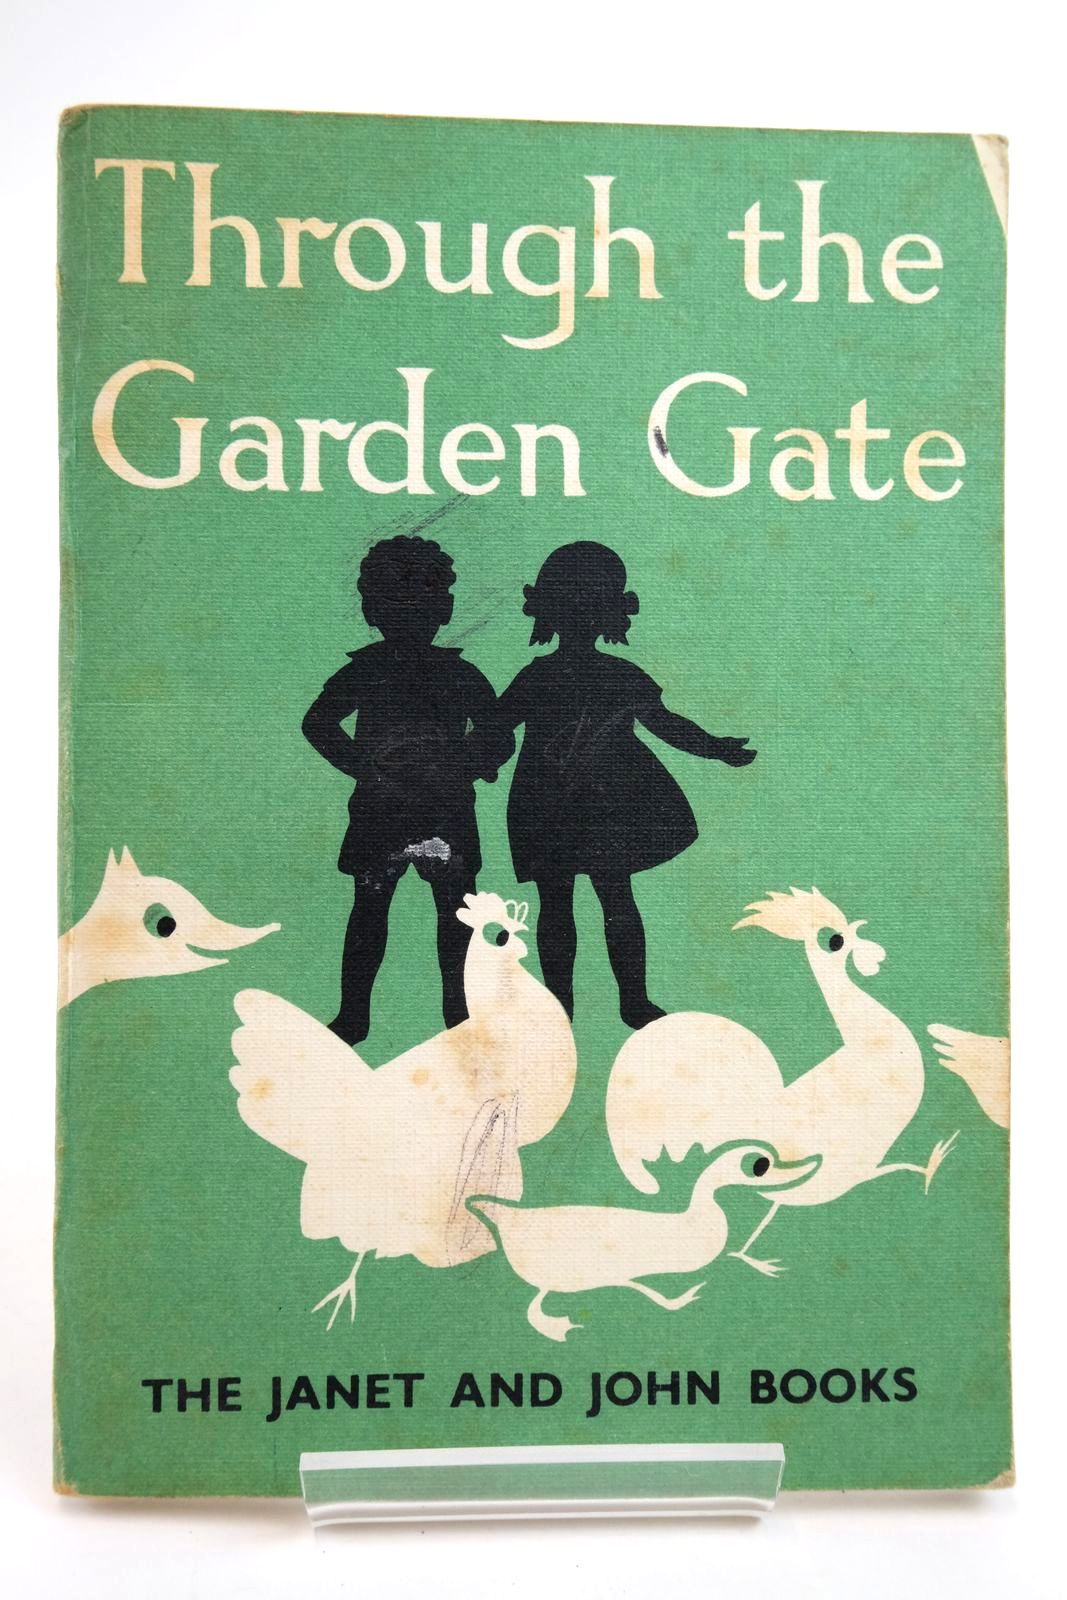 Photo of THROUGH THE GARDEN GATE written by O'Donnell, Mabel
Munro, Rona illustrated by Hoopes, Florence
Hoopes, Margaret
Sanders, Christopher published by James Nisbet & Co. Ltd. (STOCK CODE: 2135621)  for sale by Stella & Rose's Books